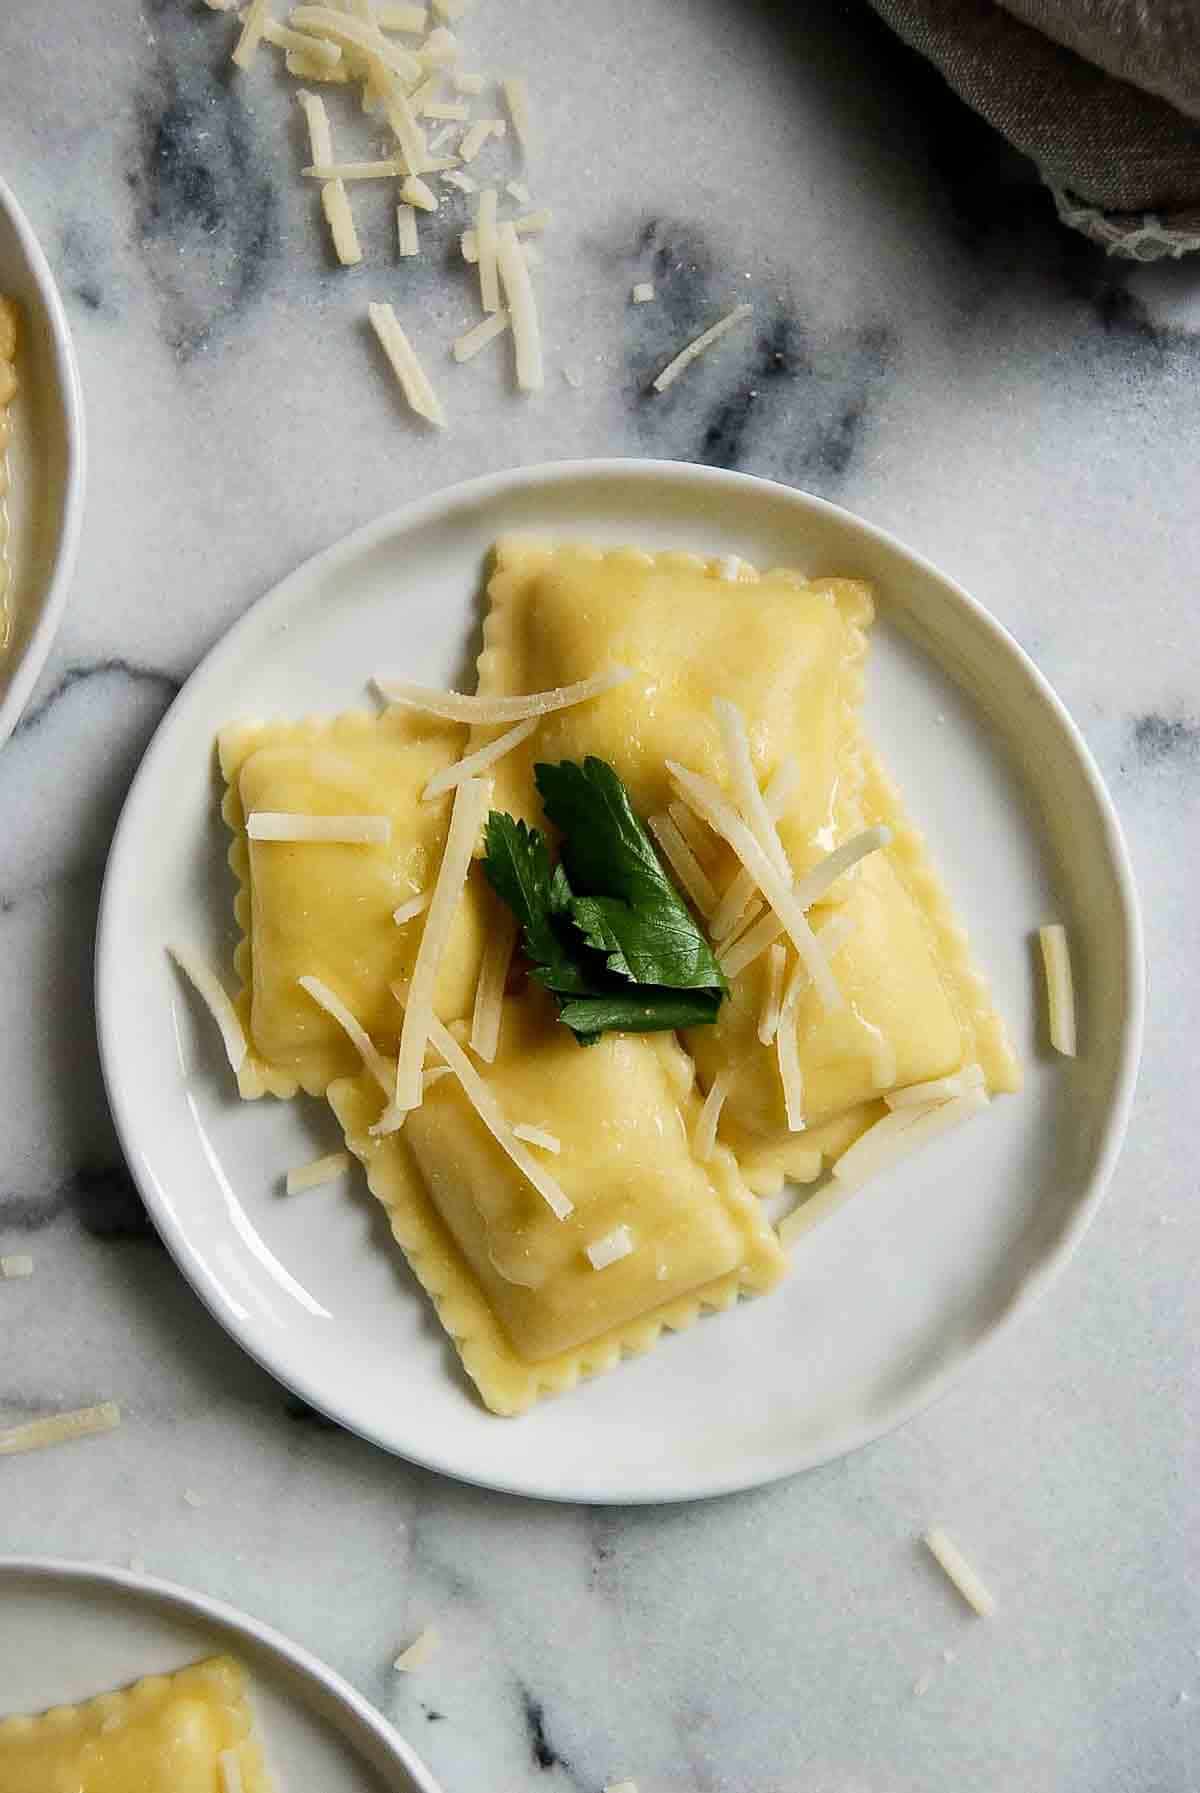 plate of cheese ravioli with garlic butter sauce, parmesan cheese and parsley. Cooking Frozen Cheese Ravioli is so easy and there are so many different ways you can use it! Below are my five favorite ways to cook frozen cheese ravioli for an easy meal or appetizer. Intro Frozen cheese ravioli is one of those freezer staples that I think everyone should have. It provides you with a simple way to make an endless variety of meals. Not only does it cook in minutes, but it’s incredibly versatile and can be used in so many ways to create a delicious dinner or appetizer. I’ve used it on its own in a simple pasta sauce, breaded baked to use as an appetizer with some marinara dipping sauce, or even as an easy substitute for noodles and ricotta cheese in a Lazy Lasagna. The options are endless and if you’re a parent, or simply a last-minute kind of cook (I happen to be both), frozen cheese ravioli is something you’ll want to have on hand almost all of the time. (You’ll always find a package of it in my freezer!). Why Use Frozen Ravioli? There are so many reasons this easy pasta has become a staple in our house: Cooks Fast. Sure, you can buy premade fresh ravioli, which probably tastes better, but if it’s speed you’re after, you can't beat frozen. Especially when you’re boiling it, frozen cheese ravioli cooks in less than 5 minutes. You can even cook the ravioli in a premade simmering sauce and you have a quick meal on the table in no time. Easy. Not only is this fast, but it’s a really easy way to make ravioli. No rolling out dough, no making your own cheese mixture, just plop it in some boiling water and you’re done. Or, use it as a shortcut to making a Lazy Day Lasagna recipe. Add some garlic bread and a simple salad and dinner is done! Delicious. Again, maybe homemade ravioli does taste a little bit better, but frozen is not far off, and once you add a sauce or some breading, the difference is minimal. Ingredients Here’s everything you’ll need to make frozen ravioli: A large pot of water Salt (for flavor) Extra Virgin Olive Oil (to prevent the ravioli from sticking together if boiling, or for crisping it up when baking or making it in the air fryer) Your favorite pasta sauce Optional: Cheese, if you’re making a casserole or want more to add to the top of your pasta dish. Breadcrumbs, fresh herbs, and eggs, if you’re making a toasted ravioli. The 5 Best Ways To Cook Frozen Cheese Ravioli Okay, so hopefully I’ve sold you on why frozen ravioli is a must-have for easy dinners. But, what’s the best way to make it? And how do you know when it’s finished? There are a variety of different methods of cooking frozen ravioli. Here are 5 easy ways to make this classic Italian staple. Boiled This is probably the fastest and easiest way to cook frozen cheese ravioli. Simply bring a large pot of water to a rolling boil. Add a little bit of salt to the water for seasoning. Add some extra virgin olive oil to the water to prevent the ravioli from sticking together. Then, simply boil for about 4-6 minutes, or until the ravioli floats to the top of the pot. For al dente ravioli (which basically means a pasta that is firm to the bite), remove immediately. Otherwise, the ravioli can continue cooking and may become a bit mushy and easily breakable. Add your favorite pasta sauce and you’ve got a delicious dinner on the table with minimal effort - perfect for busy weeknights. (See the recipe below for a great take on this easy cooking method. Baked Baked ravioli, especially when crispy and toasted can serve as a delicious appetizer with a side of marinara sauce for dipping. To make it, simply boil the ravioli for about 3 minutes to allow them to soften a bit. Then, create a breading with breadcrumbs, parmesan cheese, and Italian seasoning in one bowl, and crack a couple of eggs in another. Dip the ravioli in the egg mixture, and then in the breadcrumbs mixture to coat. Then place the ravioli on a pan lined with parchment paper and bake until golden brown and crispy. In the air fryer You can make toasted ravioli in the air fryer too! Follow the instructions above for the breading, then arrange the ravioli in an even layer in your air fryer. Bake at 400 degrees for 3 minutes, then flip and bake for an additional 3-4 minutes until the breading is crispy. To make the ravioli in the air fryer without the breading, simply brush the ravioli with some oil, place it in the air fryer, and cook as directed above. The ravioli will come out crispy and delicious! In a lasagna Frozen cheese ravioli is such a great cooking hack when making this classic Italian dish and you can do it in just a few simple steps. Simply layer your favorite sauce at the bottom of a casserole dish, add the frozen ravioli directly on top of the sauce in a single layer, then add more sauce and Parmesan and mozzarella cheese. Repeat the layers and bake the dish in the oven and you’ll have a delicious ravioli casserole in about an hour. In the microwave Don’t want to mess with your stove or oven? Ravioli can easily be made in the microwave too. Simply add the ravioli to a microwave save bowl filled with salted water and a teaspoon of olive oil, cover with plastic wrap be sure to cut a slit in the middle to allow it to vent, and cook the ravioli on high for about 5-6 minutes, checking it periodically to see if the ravioli is floating or not (you’ll know it’s done if it floats!). Then add to a sauce and serve for a tasty meal! Variations As you can see, there are lots of ways to prepare frozen ravioli. But what about serving it? Below are some ways to add different flavors to your dish. Vary your sauce. Sure, a classic tomato-based spaghetti sauce is a popular choice, but changing up your sauce can totally change the flavor of your meal. Add some ground beef or ground turkey to the sauce, incorporate some fresh garlic, or choose something totally different from tomato sauce, like a pumpkin sauce or alfredo sauce. Add some fresh herbs or spices. A little bit of oregano, thyme, or even marjoram can really amp up the flavor of your ravioli. Add it to the sauce, or simply sprinkle it a top of a simple butter sauce for some extra flavor. Even simply adding a bit of crushed red pepper flakes, garlic powder, or a grind of black pepper can add some good flavor to your delicious meal. Vary the cheese. Parmesan cheese and mozzarella are two obvious choices when you’re choosing cheese, but you could also choose something like goat cheese to add a more creamy texture, or blue cheese or gorgonzola for a little more punch. Choose a different type of ravioli. I find cheese ravioli to be the most versatile type of ravioli to keep on hand, but you can easily find different variations at your local grocery store. Look for meat-based ravioli, butternut squash, or even spinach for some different options. ​Helpful tips No matter what your cooking method, there are a few things to remember if you want perfect ravioli. Consider the steps below for the best results: 1. Don't crowd the ravioli. If you're boiling your ravioli, make sure to use enough water so that the ravioli has room to spread out a bit. Otherwise, the ravioli may stick together when cooking. If baking or air frying, be sure to spread out in a single layer to ensure everything cooks evenly and the ravioli are allowed to get a bit crispy. ​2. Use olive oil. When boiling, the olive oil can help prevent the ravioli from sticking together. And if baking or air frying, it can create a crispy exterior that's great for appetizers or for making a toasted ravioli recipe. FAQ How long does cooking frozen ravioli take? The cooking time will vary by the method you use. Frozen ravioli will boil in about 4-6 minutes. If you're making the ravioli in the air fryer, you'll need about 7 minutes, and if baking, you'll need roughly 10 minutes. Can you cook frozen ravioli without thawing? Yes! Frozen ravioli cooks easily without thawing which makes it a great way to make an easy meal quickly. It also makes it a good staple to keep on hand in your freezer. How long should you boil frozen ravioli? As a general rule, frozen ravioli takes about 4-6 minutes to boil. But it's also a good idea to check your package instructions to make sure since different brands or types of ravioli may require a shorter or longer cook time. How can you tell ravioli are done cooking? You'll know the ravioli cooked through when they float to the top of the pan when boiling. How do you cook frozen ravioli without breaking them? One common complaint with boiling ravioli is that they're easy to break. This often is a result of cooking the ravioli for too long, which can make it mushy. Don't let your ravioli sit in boiling water for too long to avoid this. Can you cook frozen ravioli in the air fryer? Yes! Cooking frozen ravioli in the air fryer is a delicious way to make toasted ravioli. Simply brush with oil, then air fry at 400 degrees F for about 7 minutes, flipping the ravioli halfway through. You can also add a breading to the ravioli for some extra flavor. Mix bread crumbs, Italian seasoning, and parmesan cheese in a small bowl, and crack three eggs in a second bowl. Dip the ravioli in the egg mixture, then again in the breadcrumb mixture, and then cook as directed above for a tasty appetizer. Can you bake frozen ravioli instead of boiling? Sure can! Boil the ravioli for about three minutes to soften them, then brush oil and arrange them in an even layer on a baking dish or tray and bake for about 10 minutes at 400 degrees F. For toasted ravioli, mix bread crumbs, Italian seasoning, and Parmesan cheese in a small bowl, and crack three eggs in a second bowl. Dip the ravioli in the egg mixture, then again in the breadcrumb mixture, and then cook as directed above. Can you cook frozen ravioli in the microwave? Yes! Add the ravioli to a microwave-safe bowl filled with water (be careful not to crowd the ravioli!). Cover with vented plastic wrap and cook on high for about 7 minutes, or until the ravioli floats in the water. How to prevent ravioli from sticking together when cooking? A great way to prevent sticking when boiling ravioli is to add a small drop of olive oil to the water. This makes it easy for the ravioli to be separated if they happen to stick together slightly. How do I store cooked ravioli? If you find yourself with leftover cooked ravioli, simply allow it to cool completely, then store it in an airtight container in the refrigerator. Cooked ravioli will keep for about 4-5 days when stored in the fridge. Easy Recipe For Frozen Cheese Ravioli 1 lb cheese ravioli ½ teaspoon salt 1 tablespoon extra virgin olive oil 3 tablespoon melted butter or extra virgin olive oil 4 garlic cloves, minced ¼ cup parsley, chopped ¼ cup shredded parmesan Fill a large pot with water. Add the salt and 1 tablespoon of olive oil and bring to a boil. Add the ravioli to the large pot of salted water and continue boiling until the ravioli float to the top. Carefully remove the ravioli with a slotted spoon and place it onto a tray lined with a paper towel, or in a colander. While the ravioli is cooking, prepare the garlic butter. Melt 3 tablespoon of butter in a small saucepan over medium heat. Add the minced garlic and saute for 1-2 minutes, or until the garlic is fragrant and softened. Pour the garlic sauce over the cooked cheese ravioli and toss gently to combine, being careful not to break the ravioli pieces. Serve in individual bowls or plates and top with parsley and parmesan.